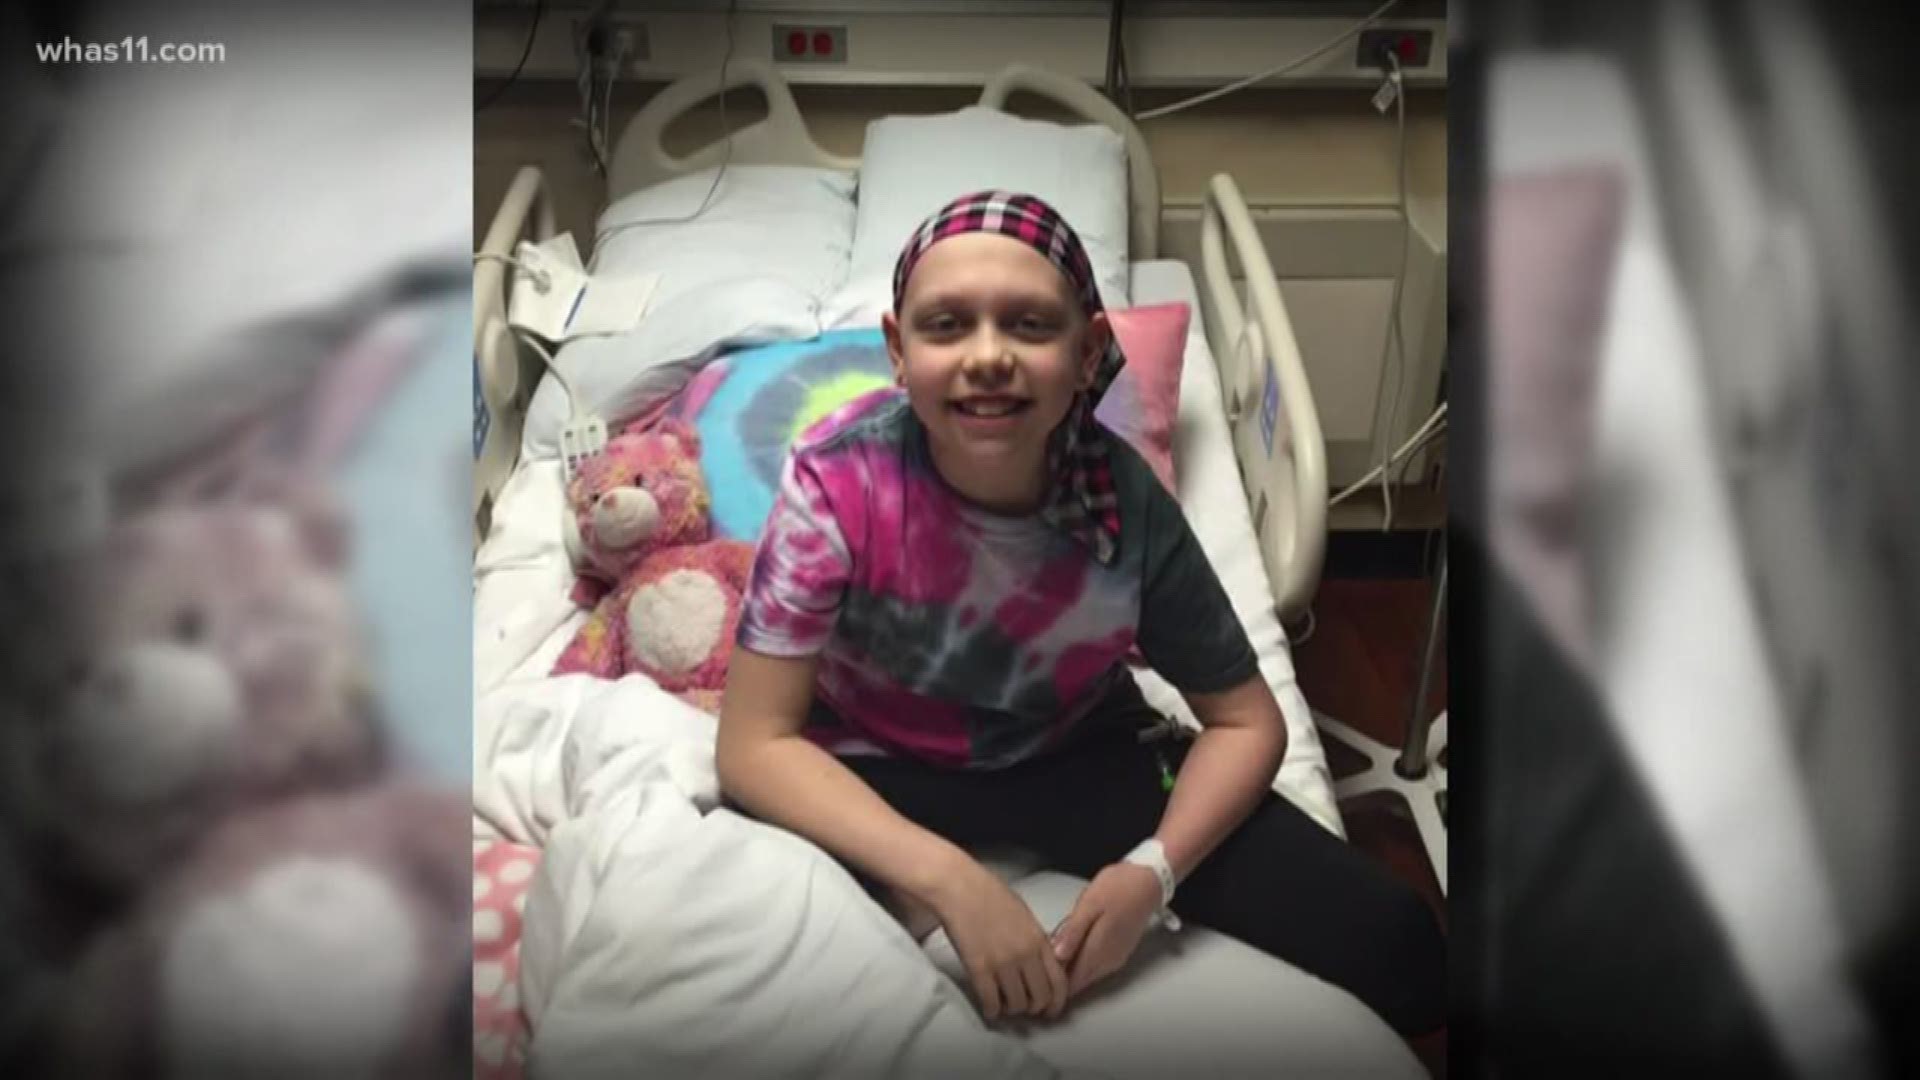 Lana Dobson dreamed of being a high-level gymnast before she was diagnosed with leukemia.